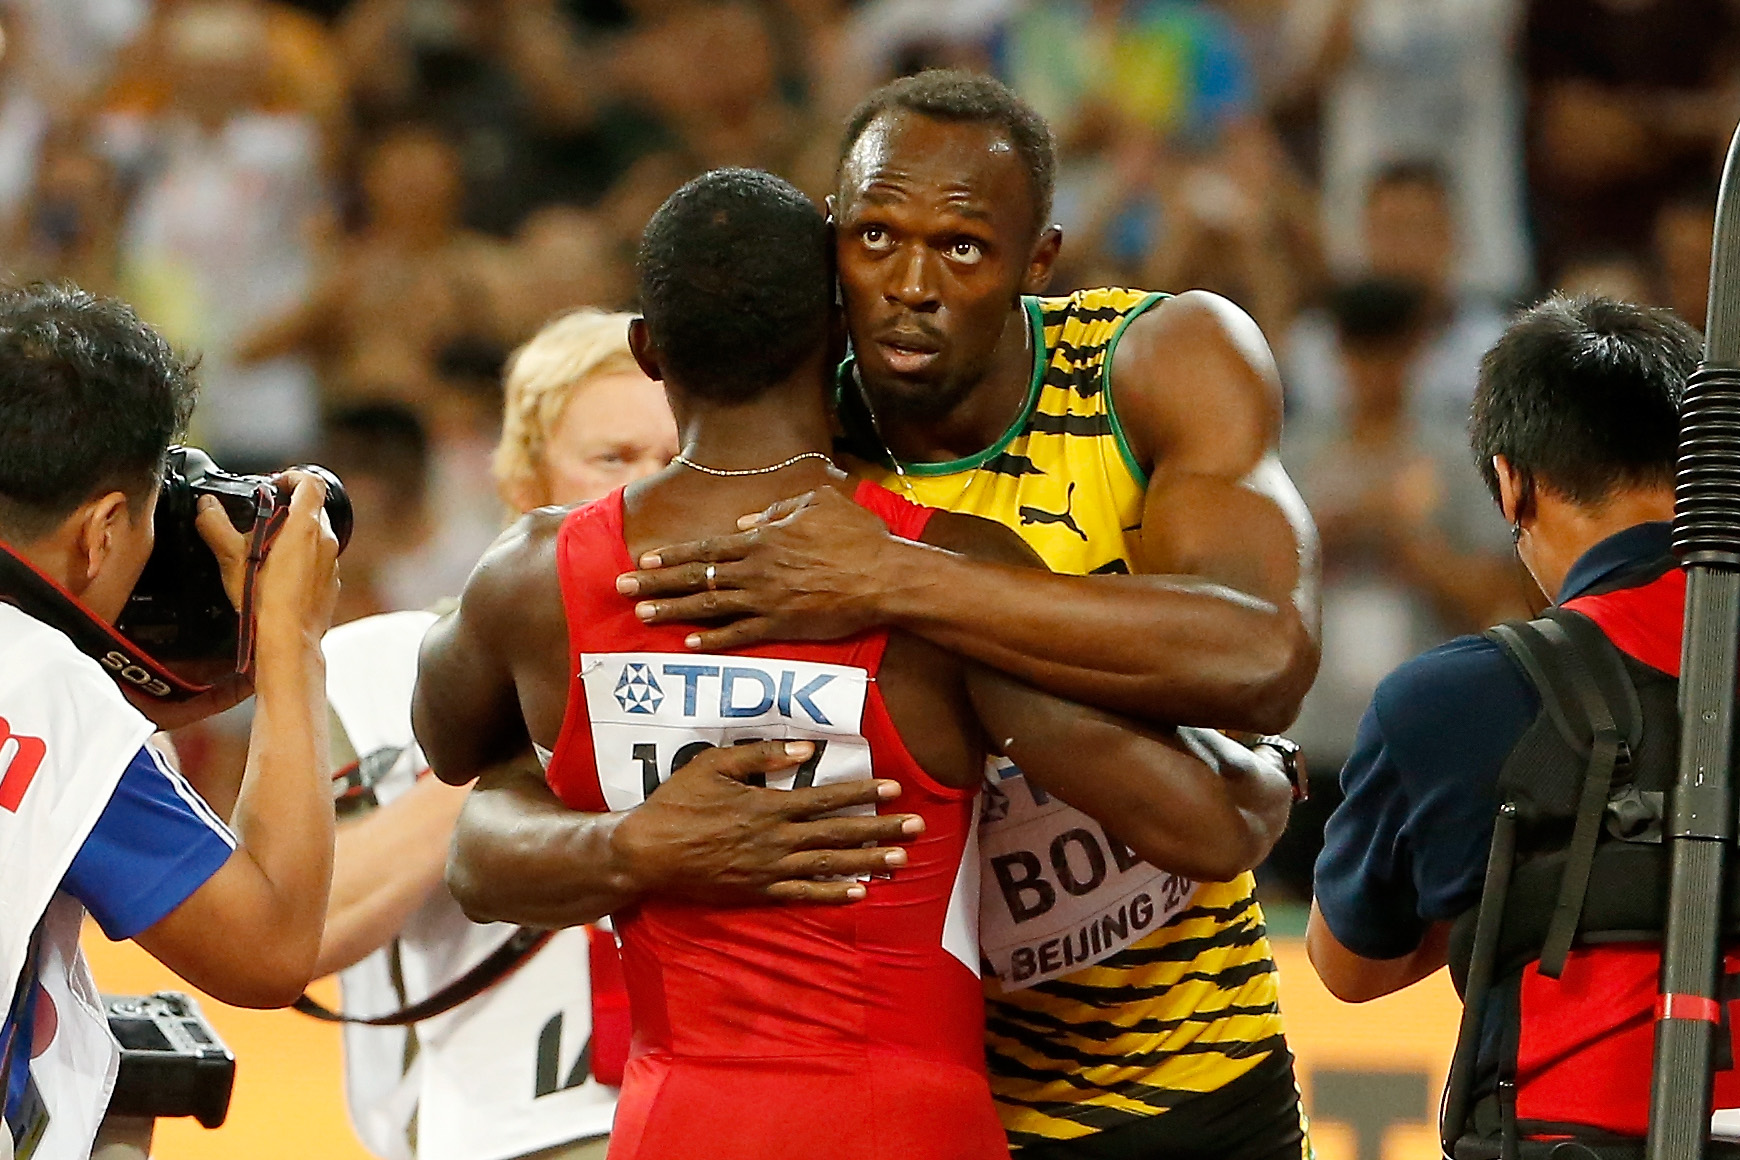 Gatlin says Bolt will show up in Rio